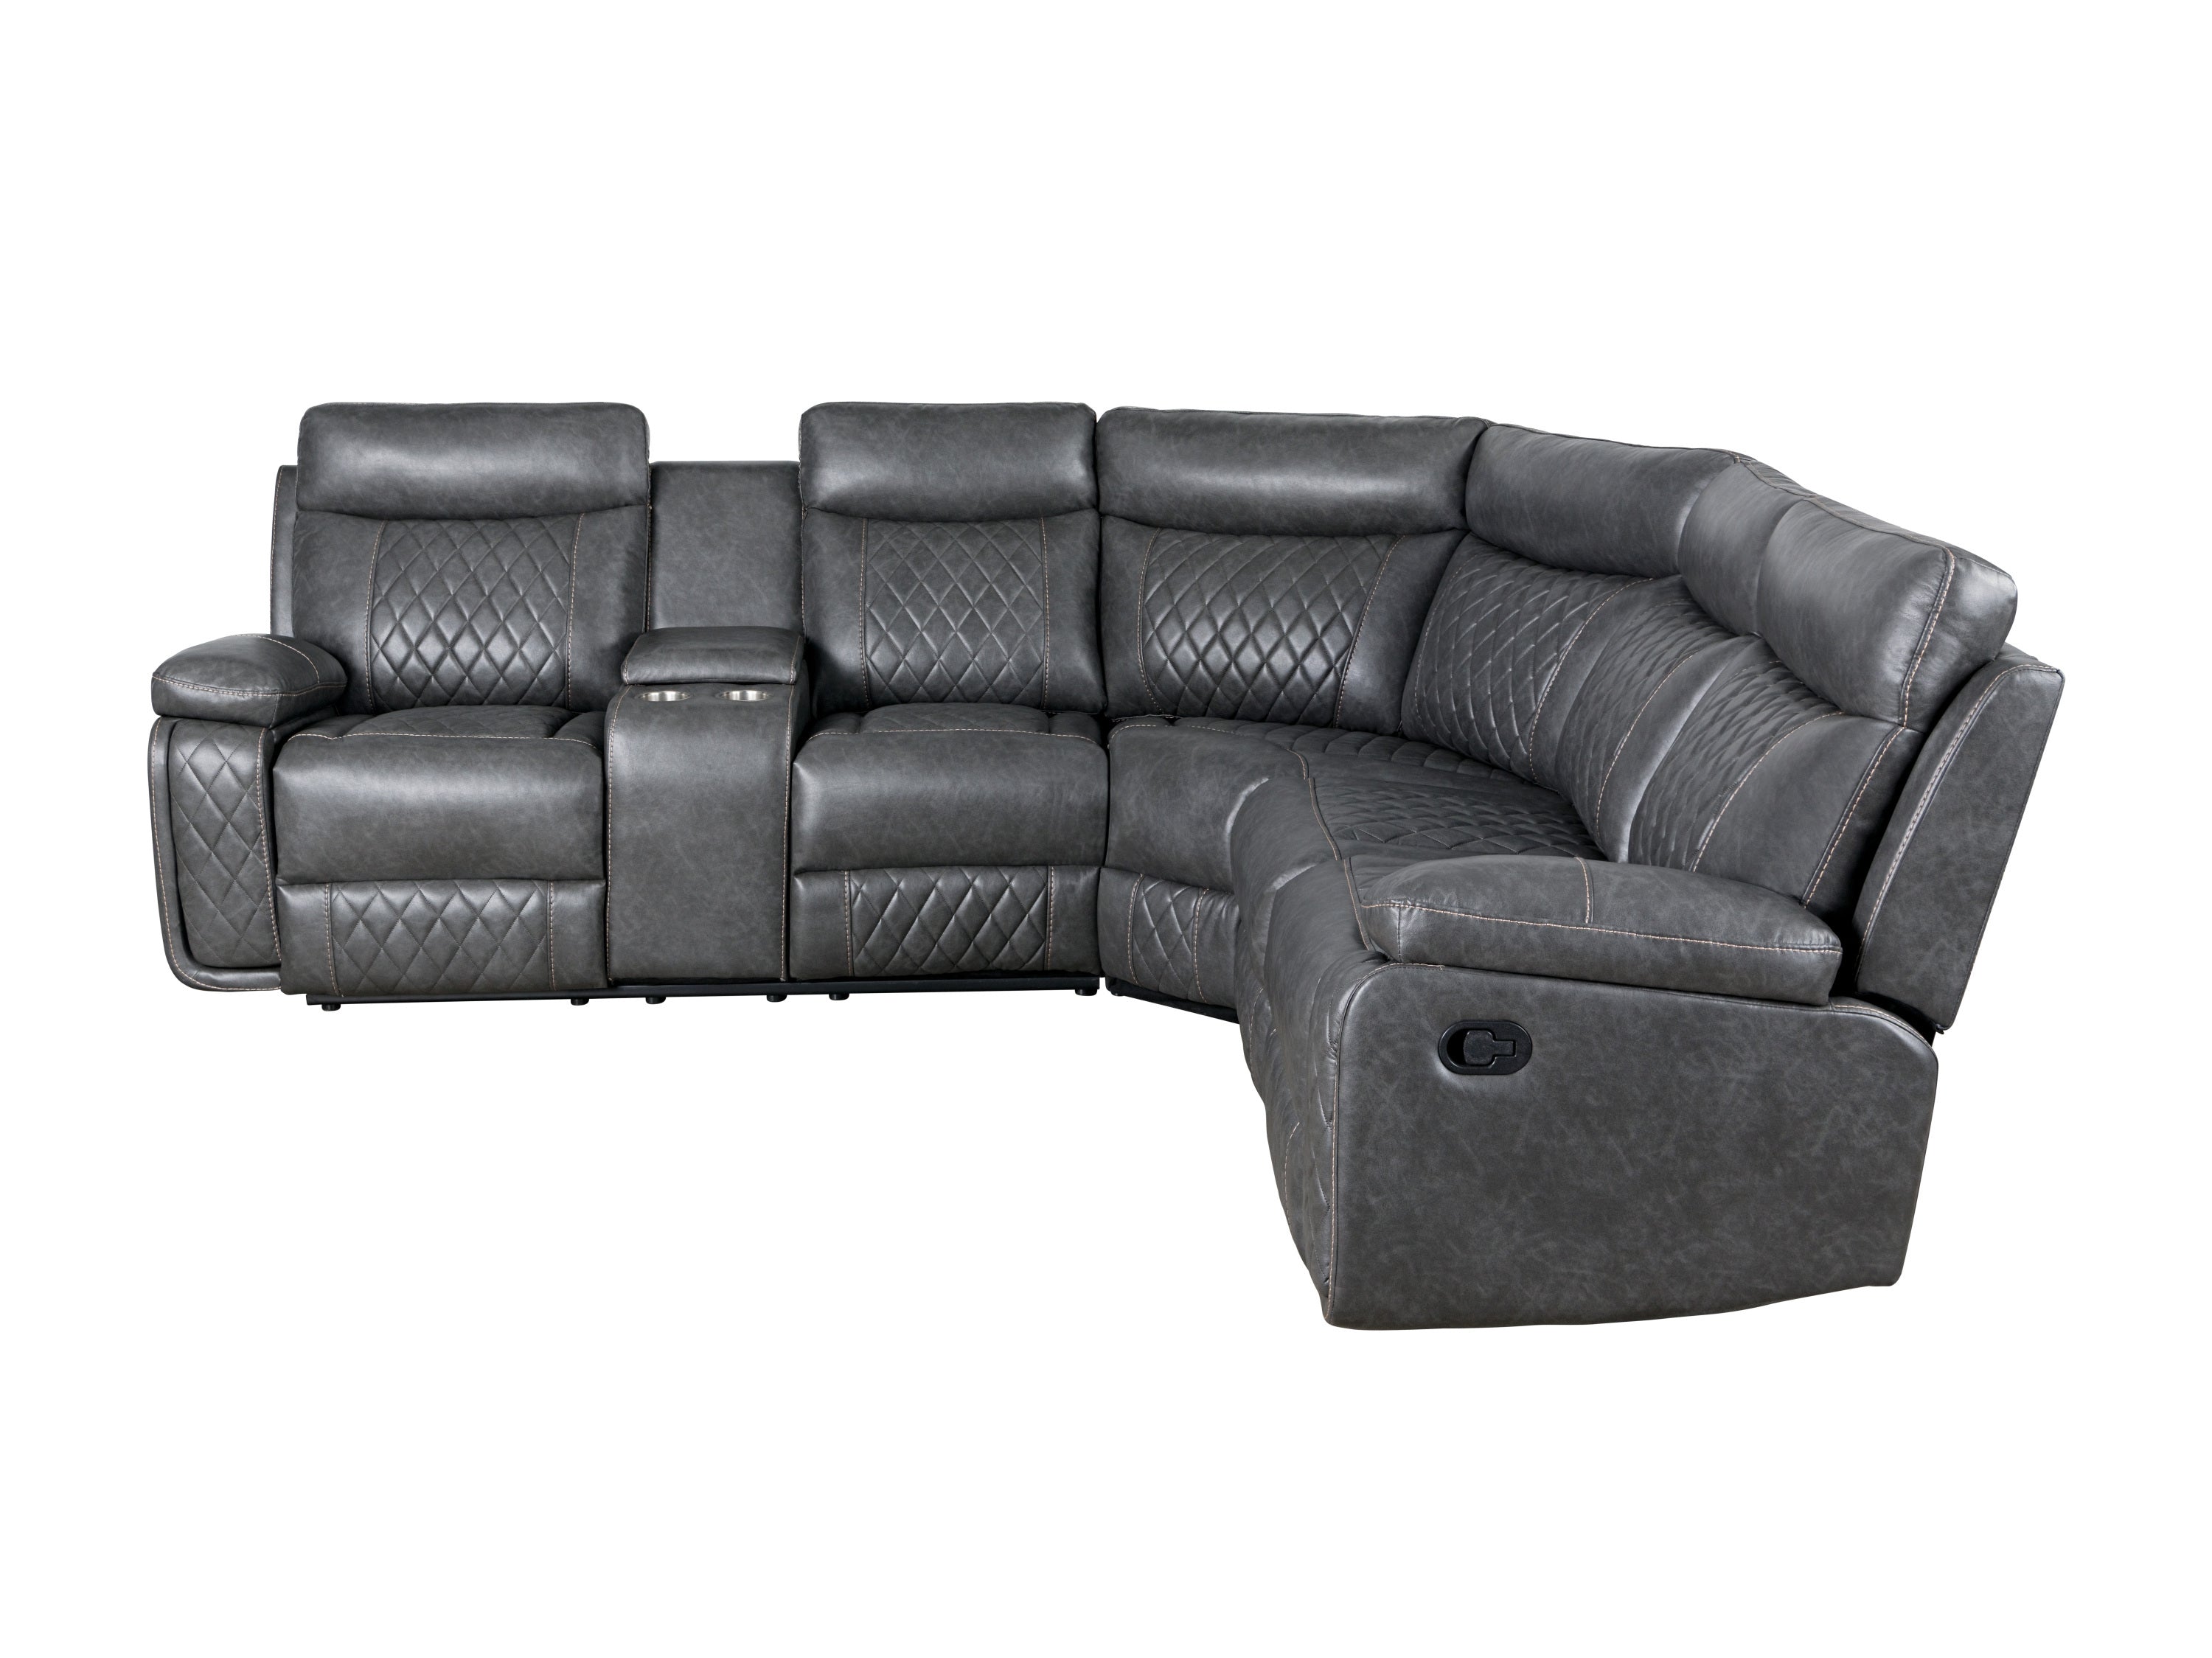 Gray Faux Leather Reclining Sectional Sofa | Home Theater Seating